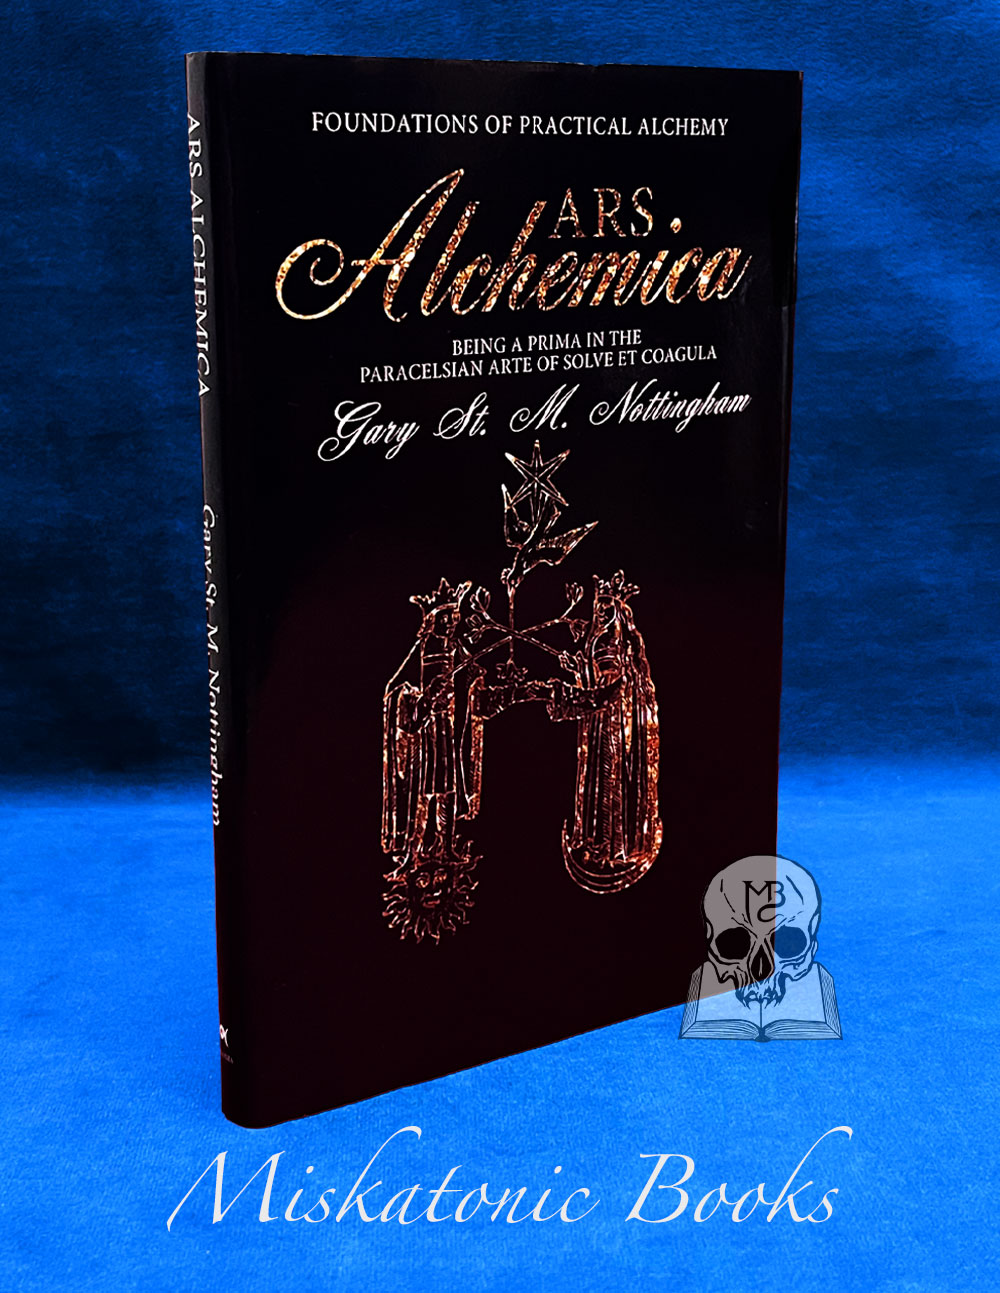 ARS ALCHEMICA - Foundations of Practical Alchemy: Being a Prima in the Paracelsian Arte of Solve et Coagula by Gary St Michael Nottingham - First Edition Hardcover Edition